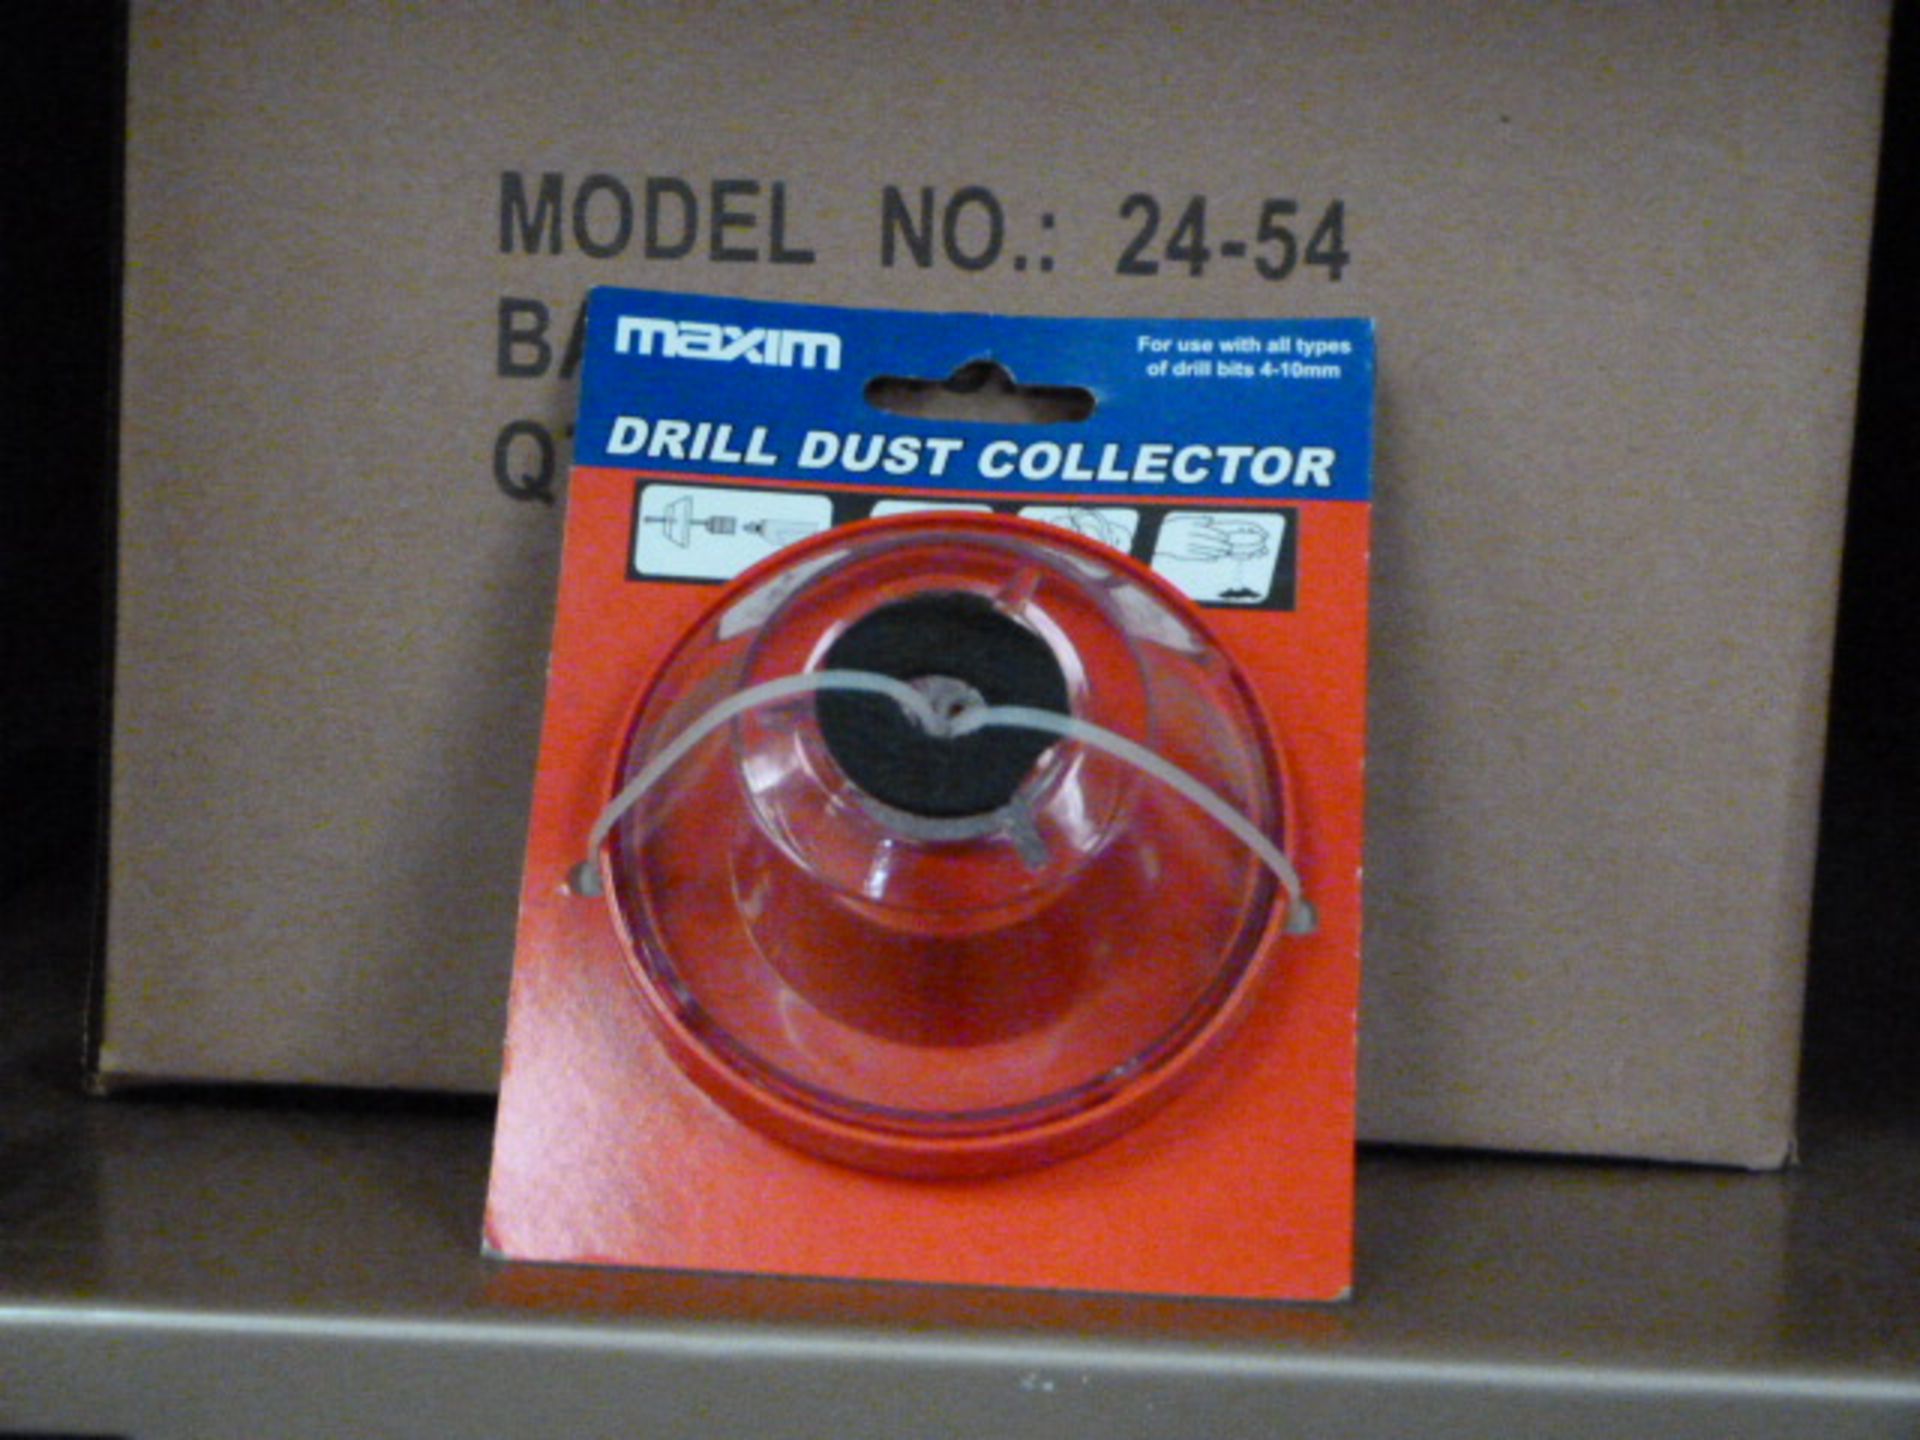 *Two Boxes of 25 Maxim Drill Dust Collectors